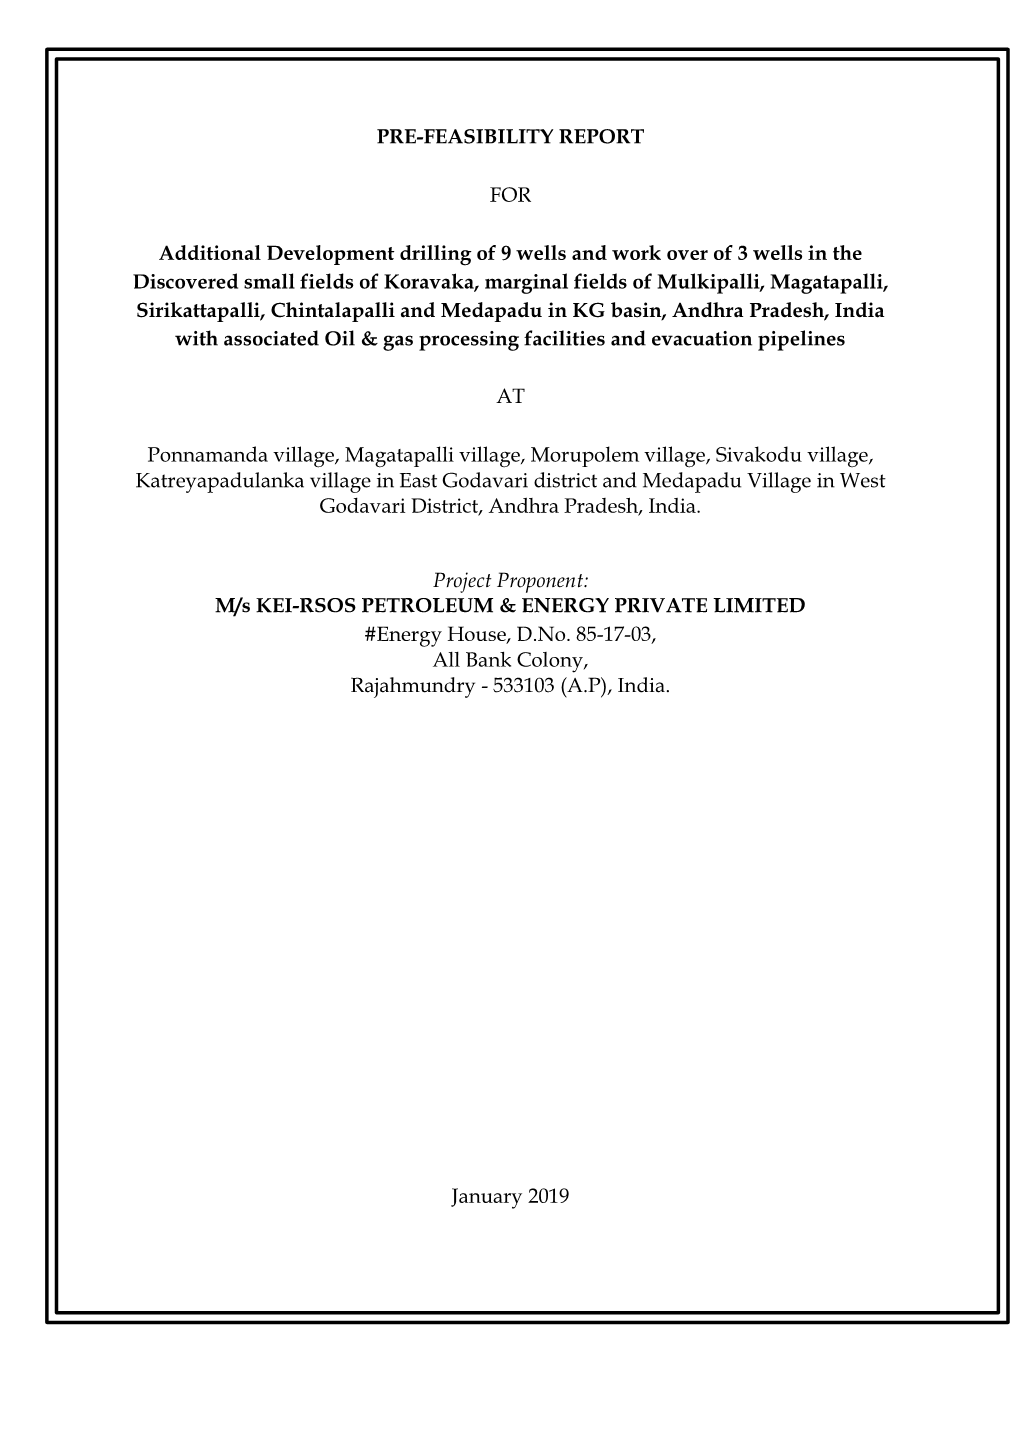 PRE-FEASIBILITY REPORT for Additional Development Drilling of 9